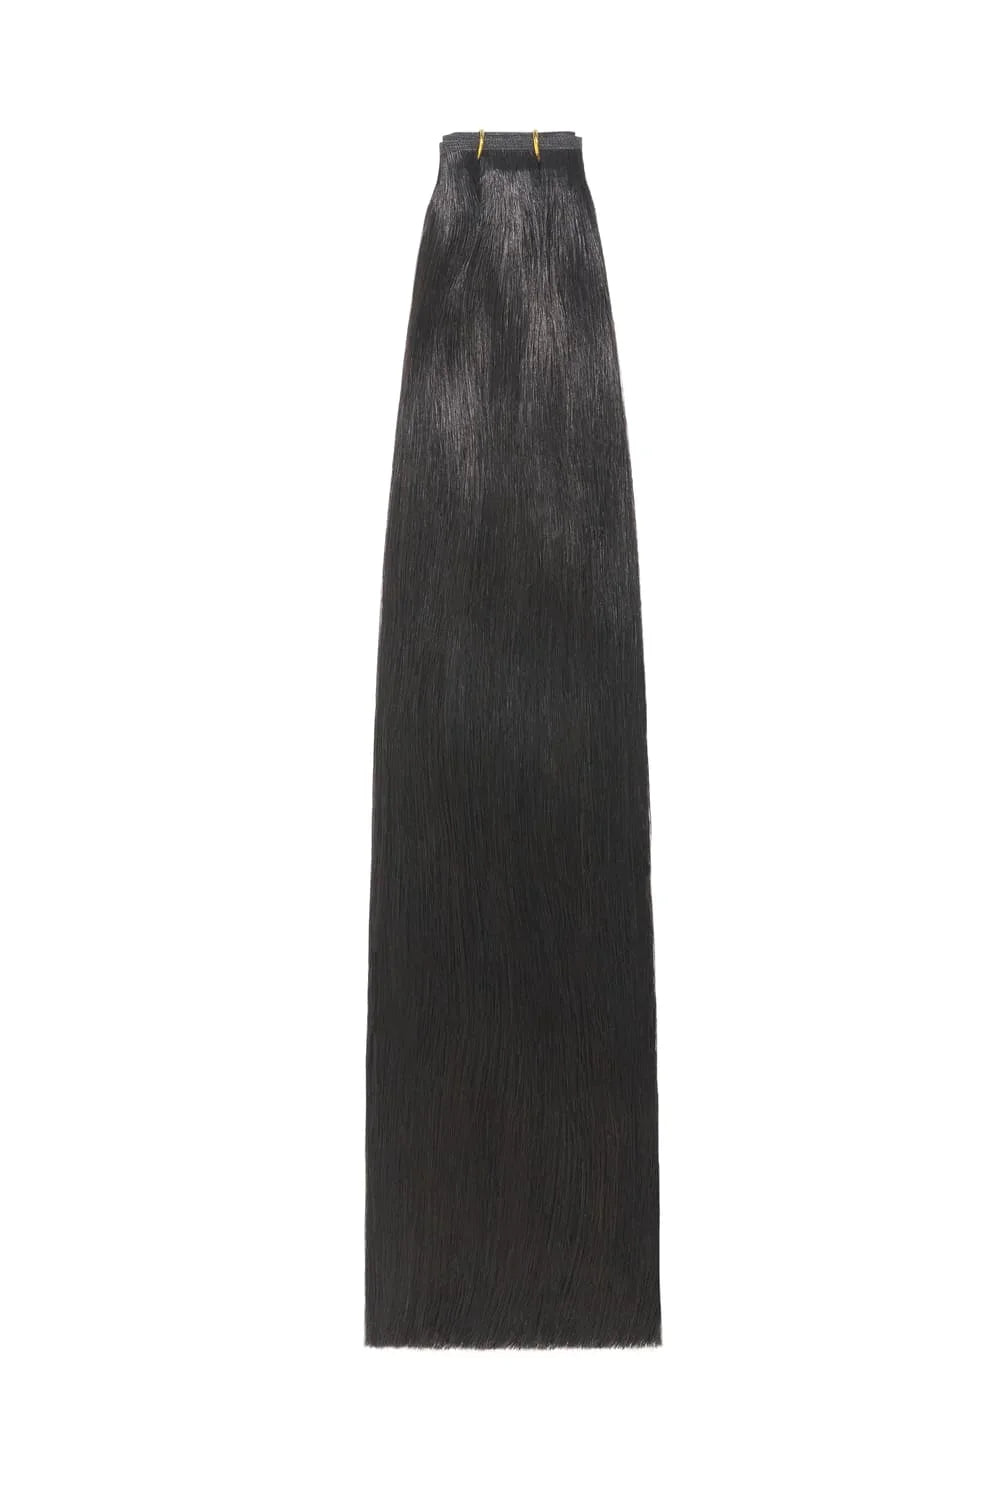 Off/Natural Black (#1B) Remy Royale Flat Weft Hair Extensions